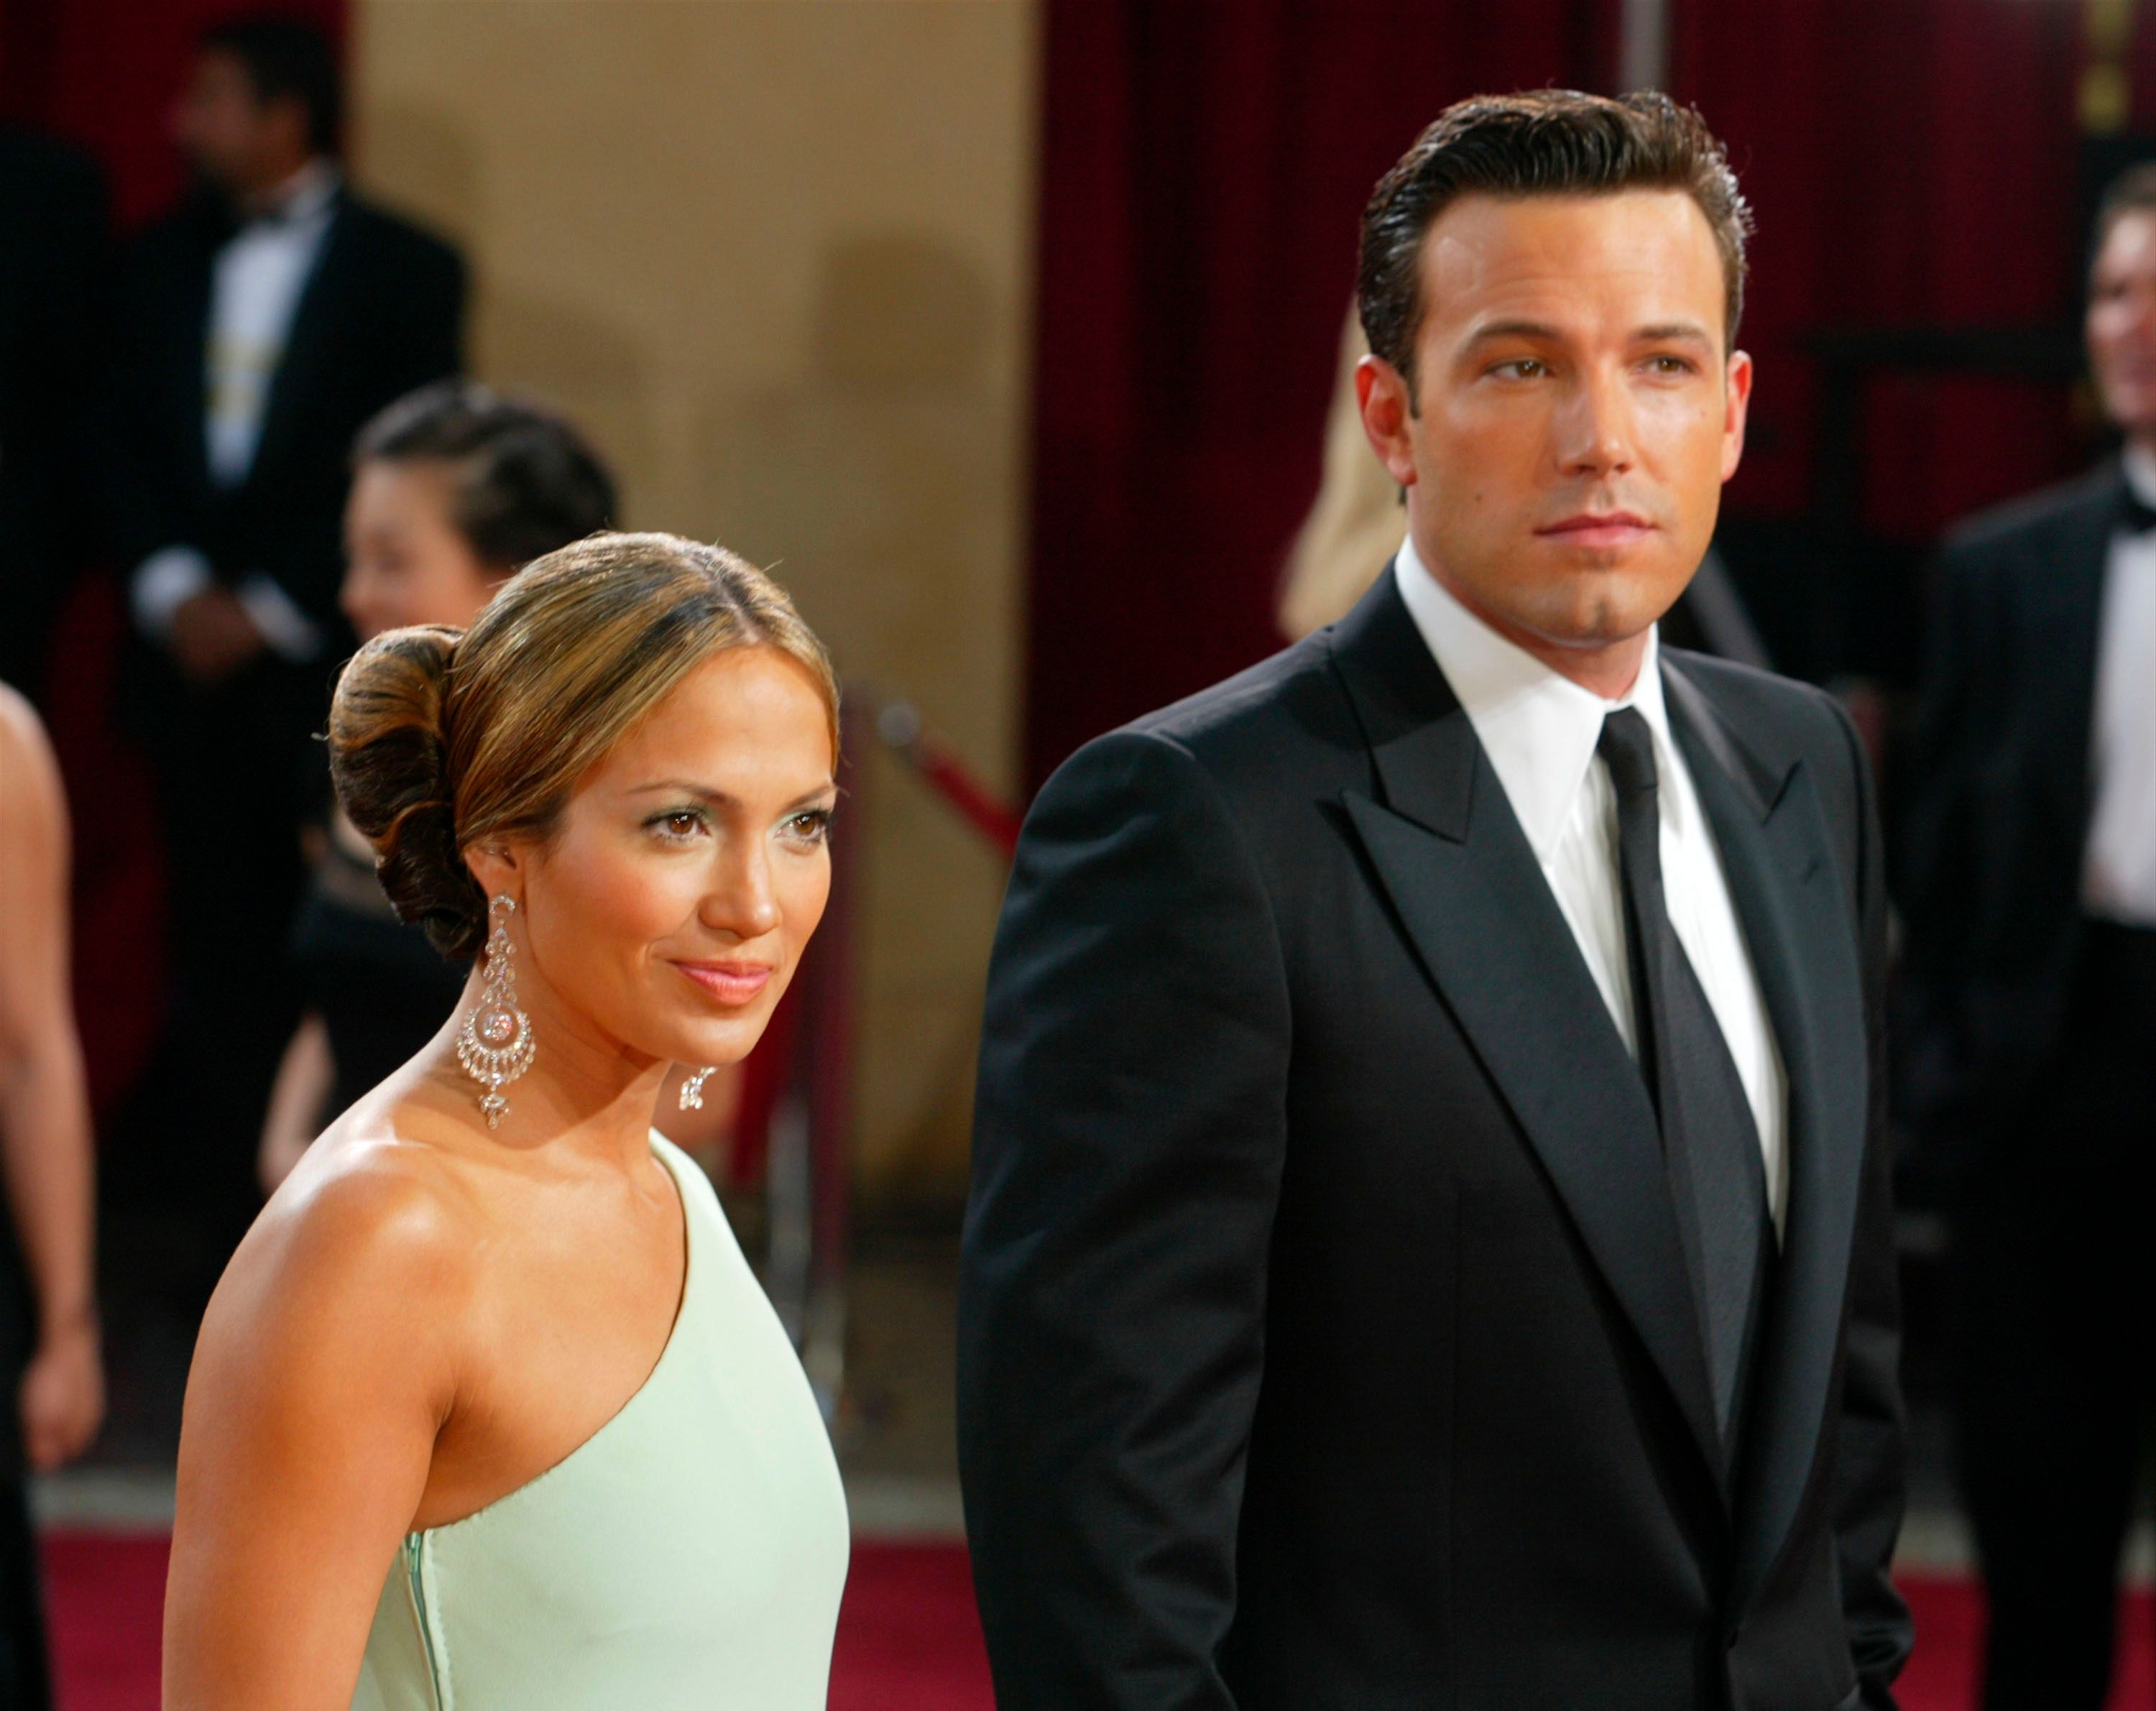 Ben Affleck and Jennifer Lopez at the 75th Annual Academy Awards at the Kodak Theater on March 23, 2003 | Photo: Getty Images